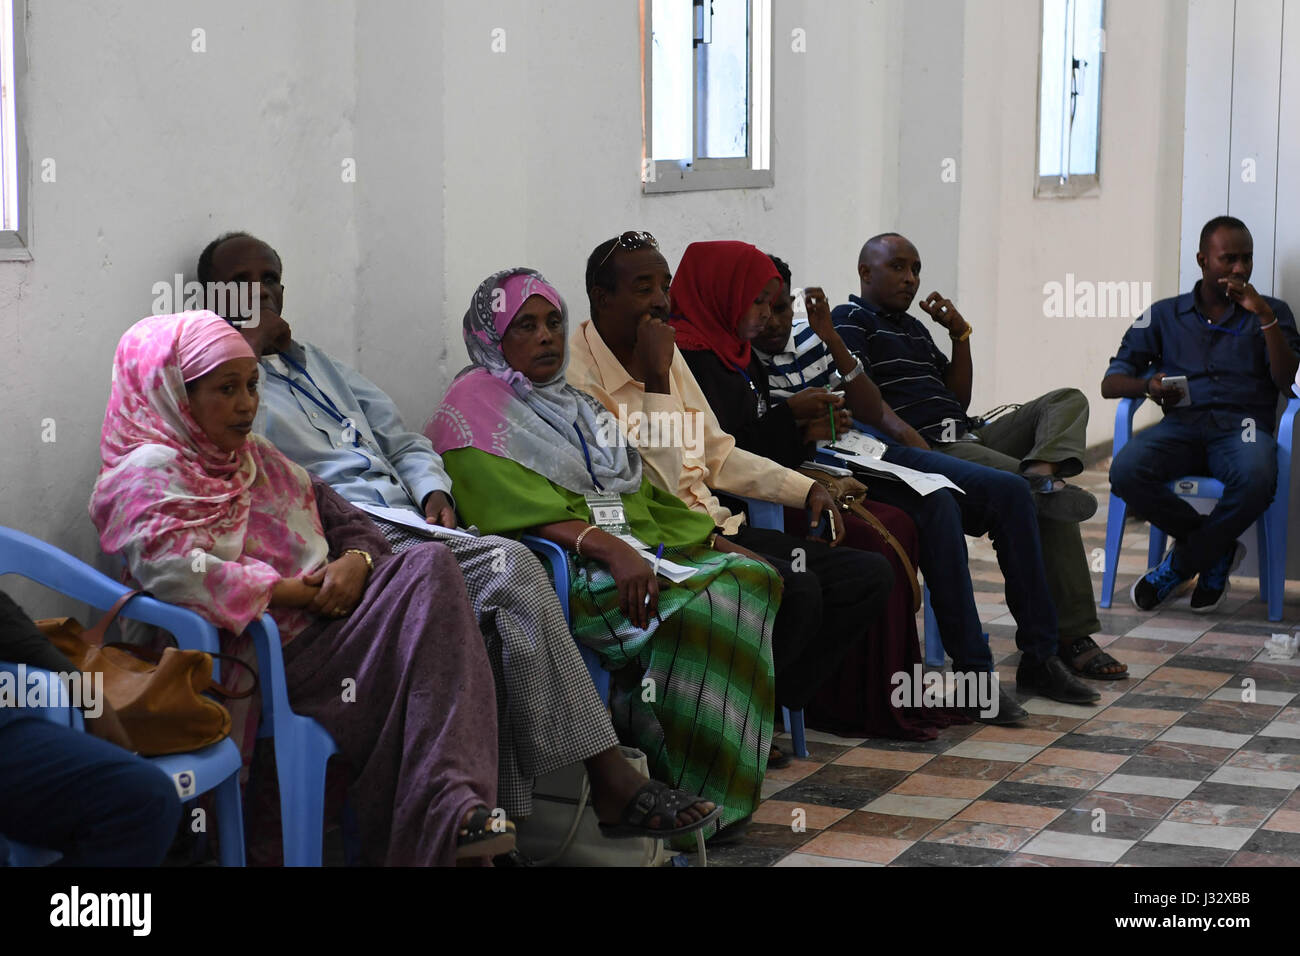 National observers witness the electoral process to choose members of the Upper House of the Federal Parliament in Mogadishu, Somalia on January 8, 2017. AMISOM Photo / Omar Abdisalan Stock Photo